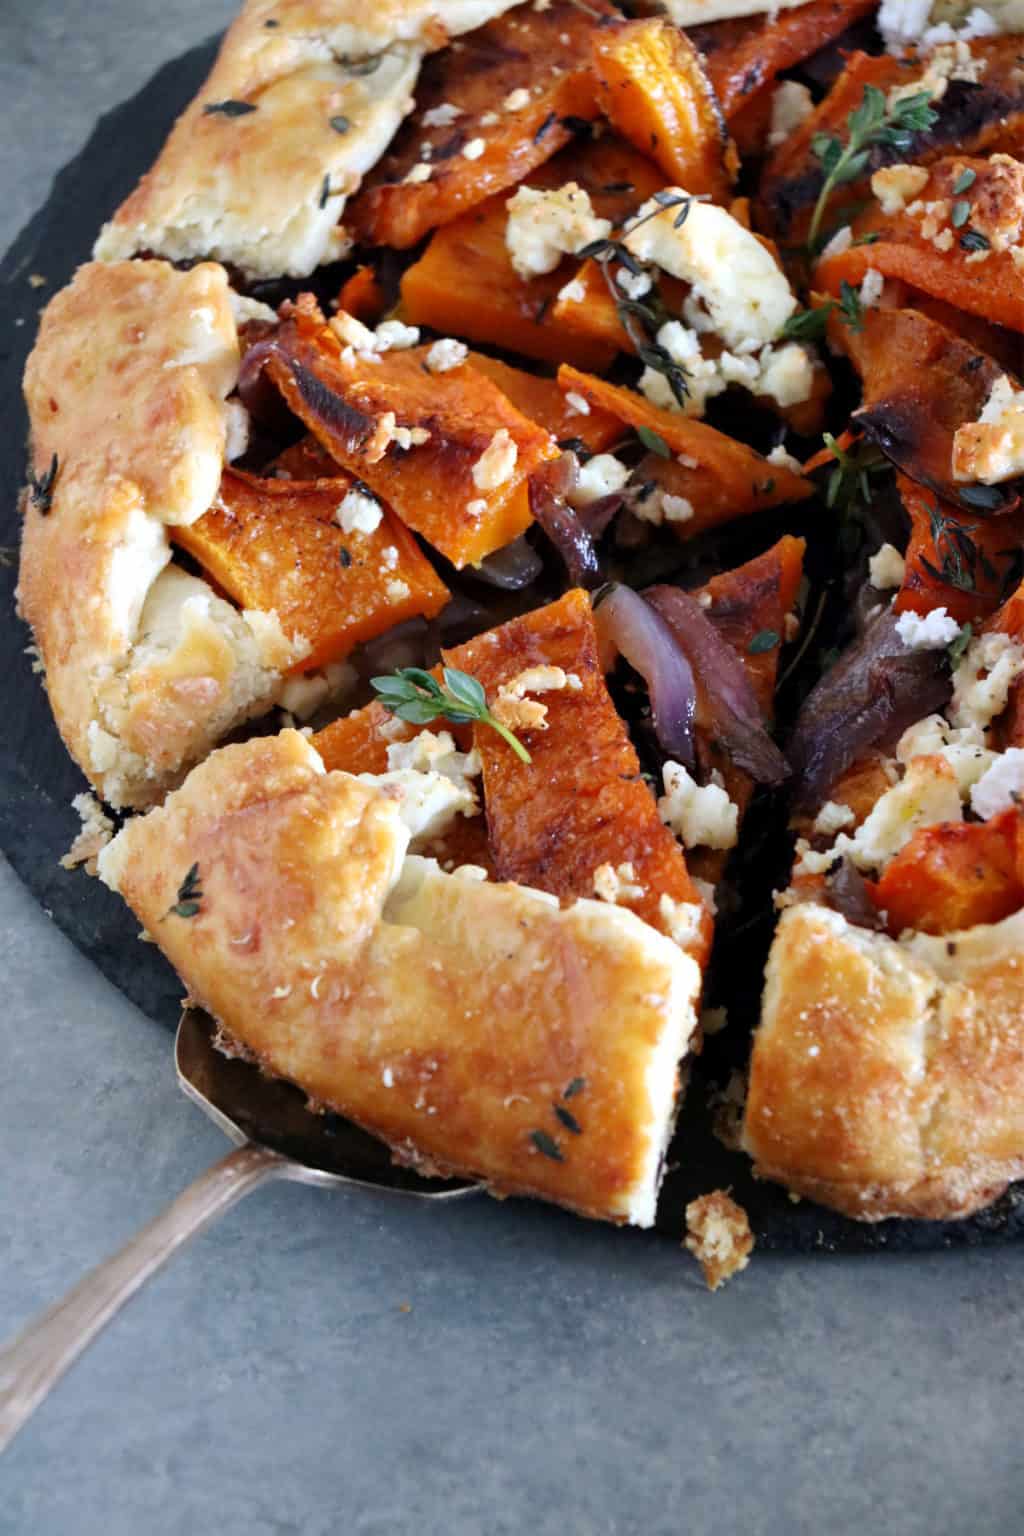 Thyme Butternut Squash Galette with Parmesan Crust - Del's cooking twist